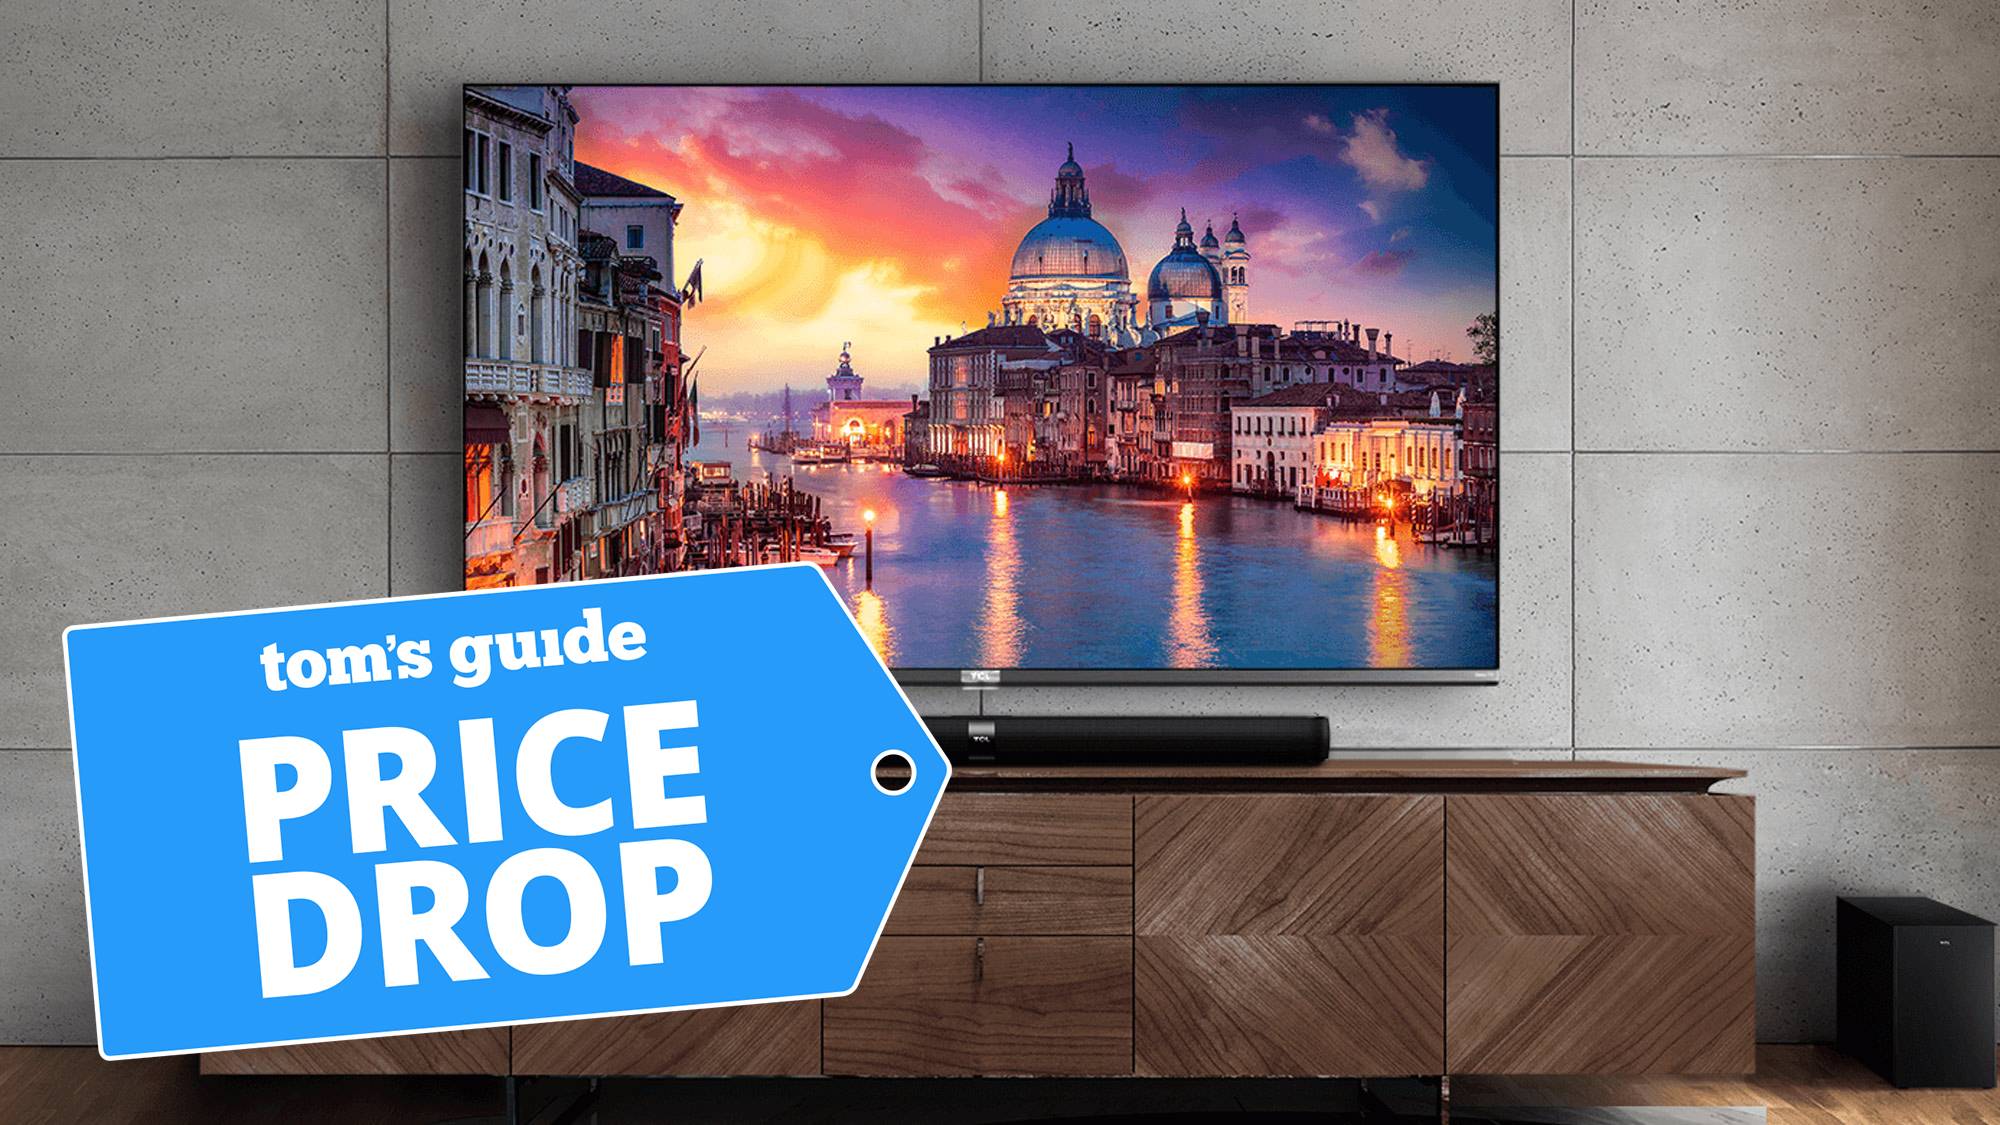 TCL television with a Tom's Guide deal tag